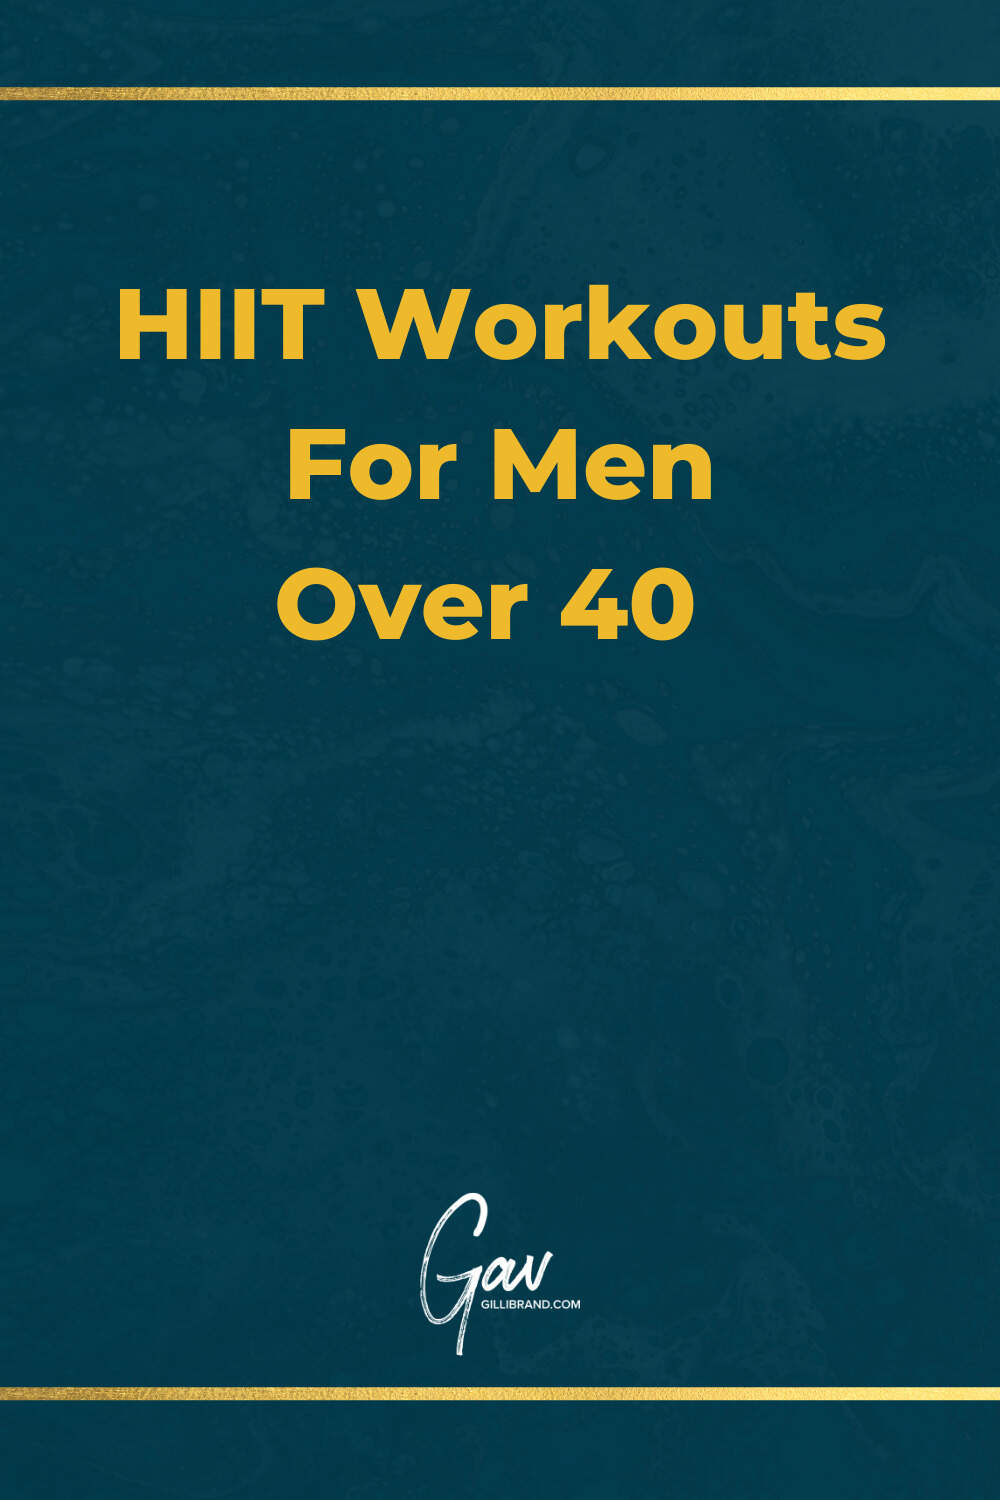 blog article for HIIT exercises for men article